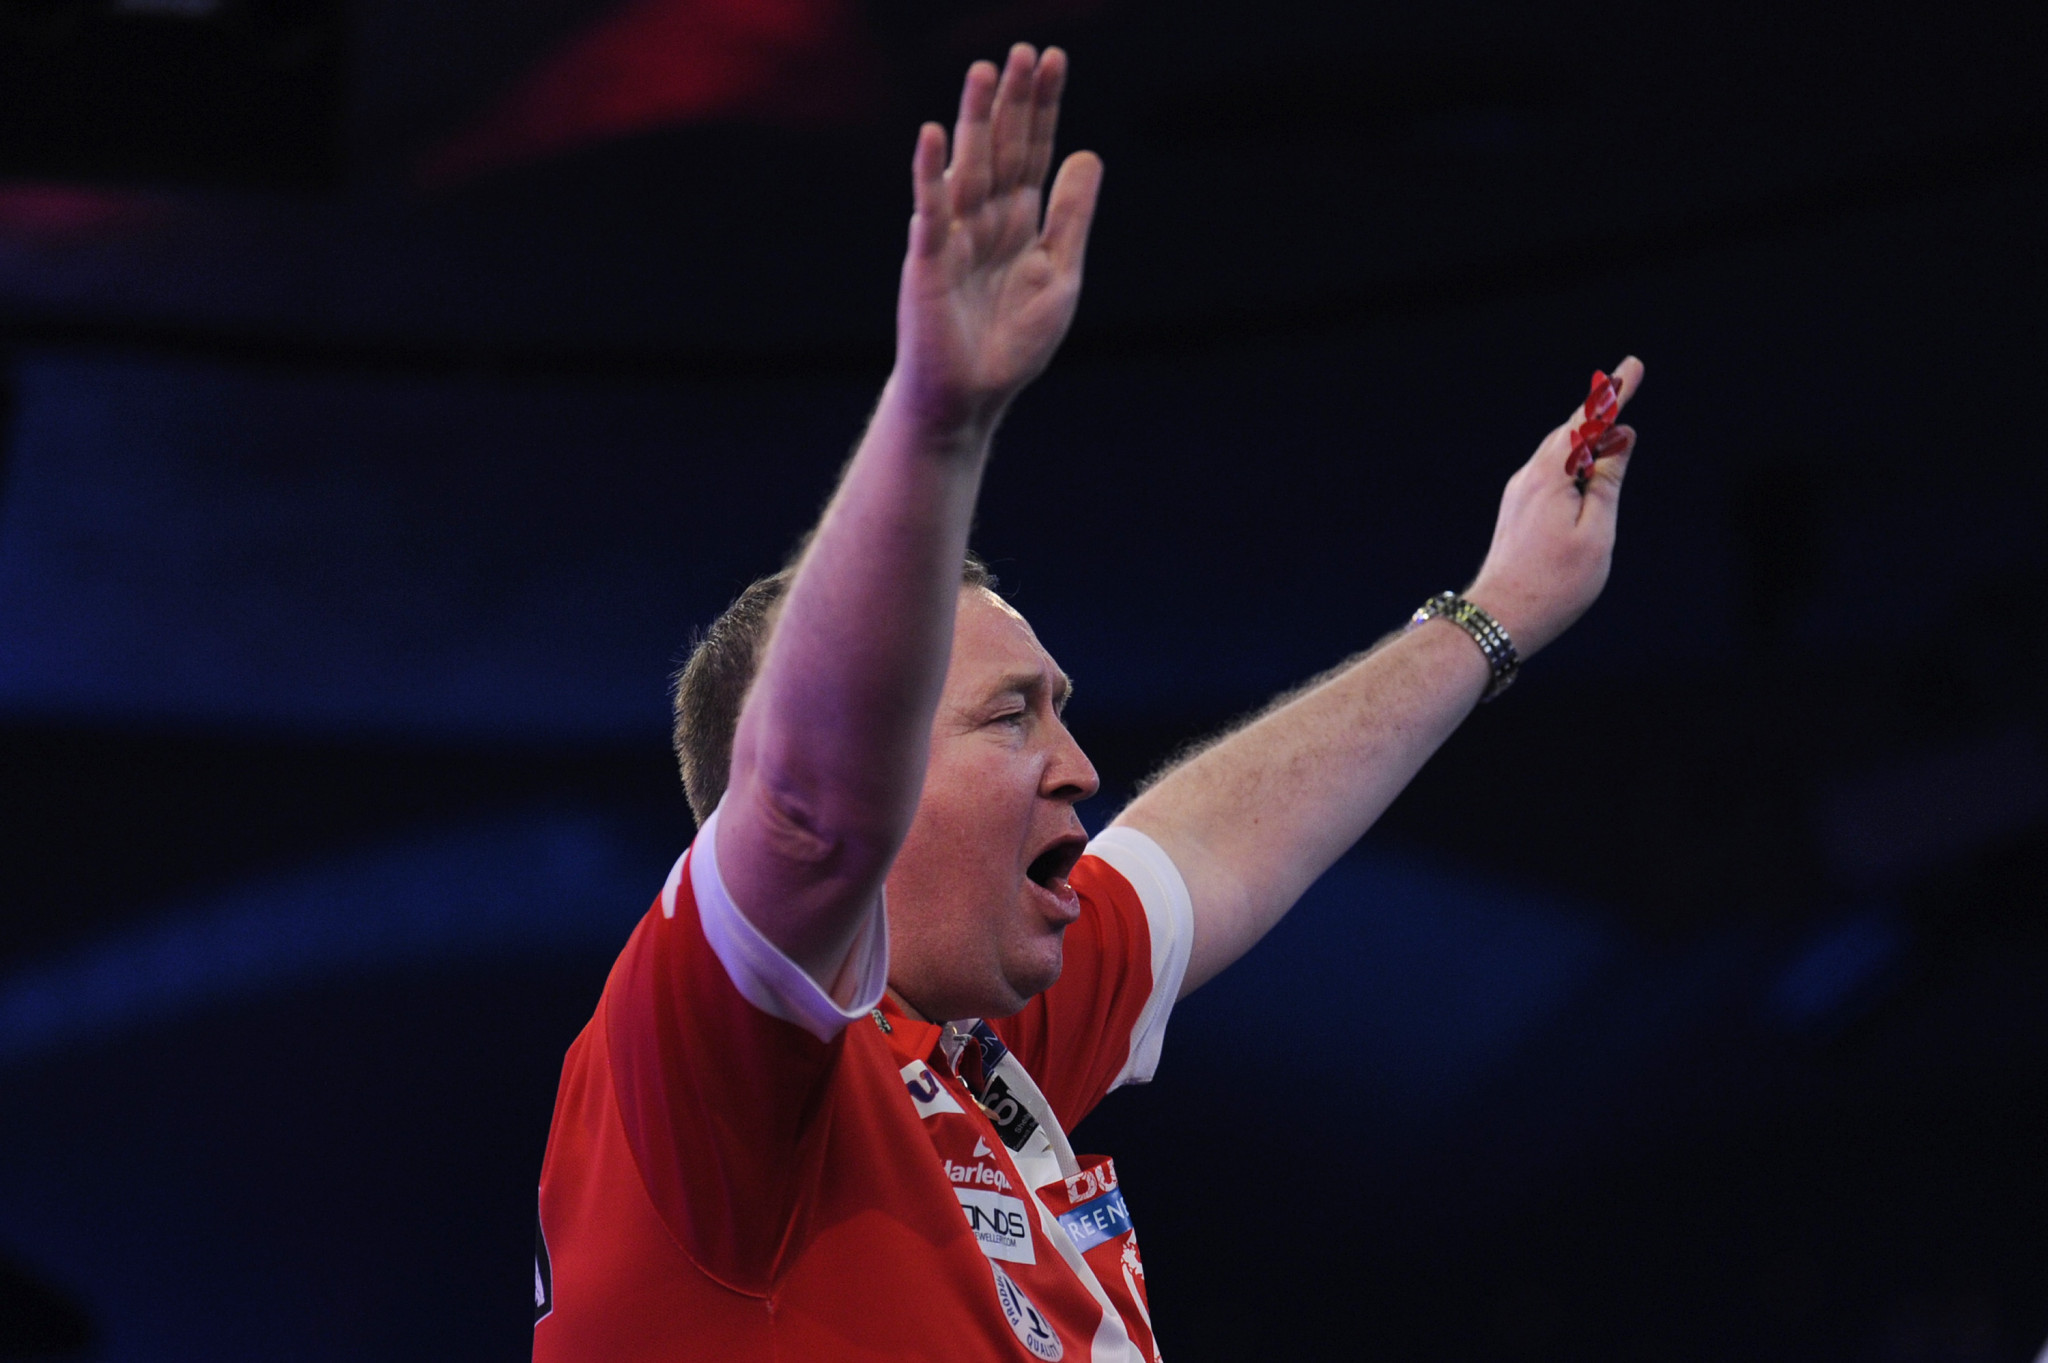 Glen Durrant won four sets in a row to seal victory ©Getty Images